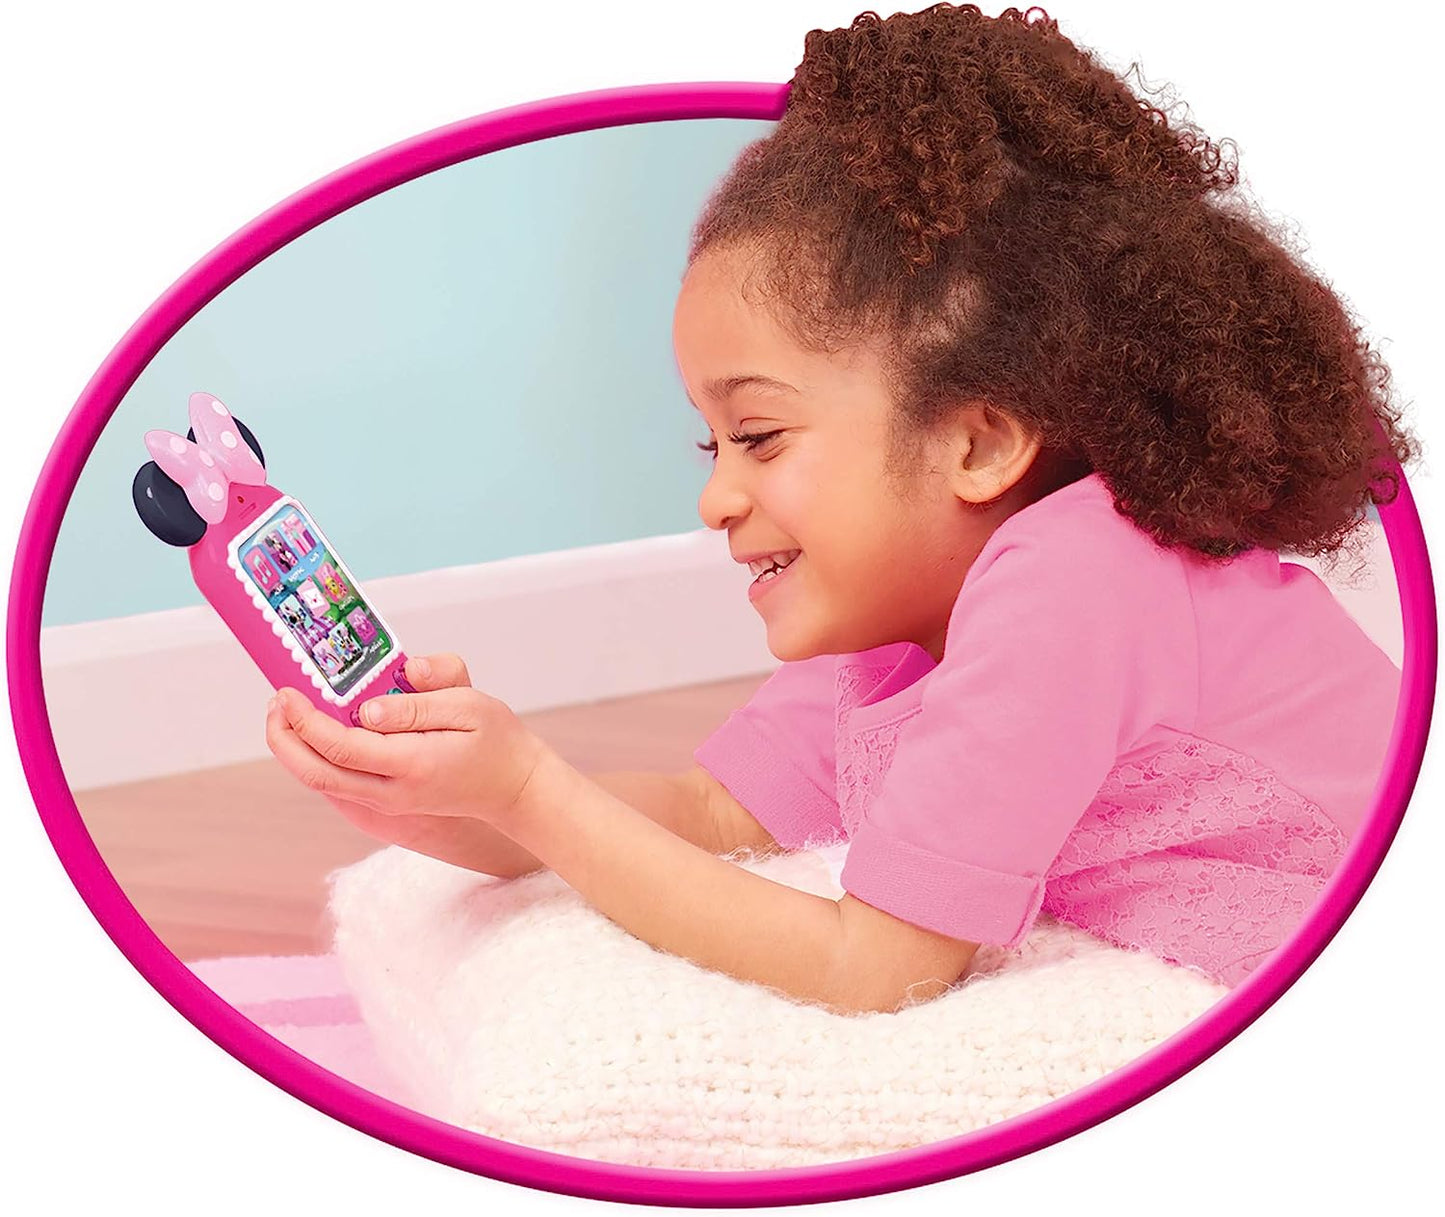 Minnie Bow-Tique Why Hello Pretend Play Cell Phone, Lights and Sounds, Kids Toys for Ages 3 Up by Just Play